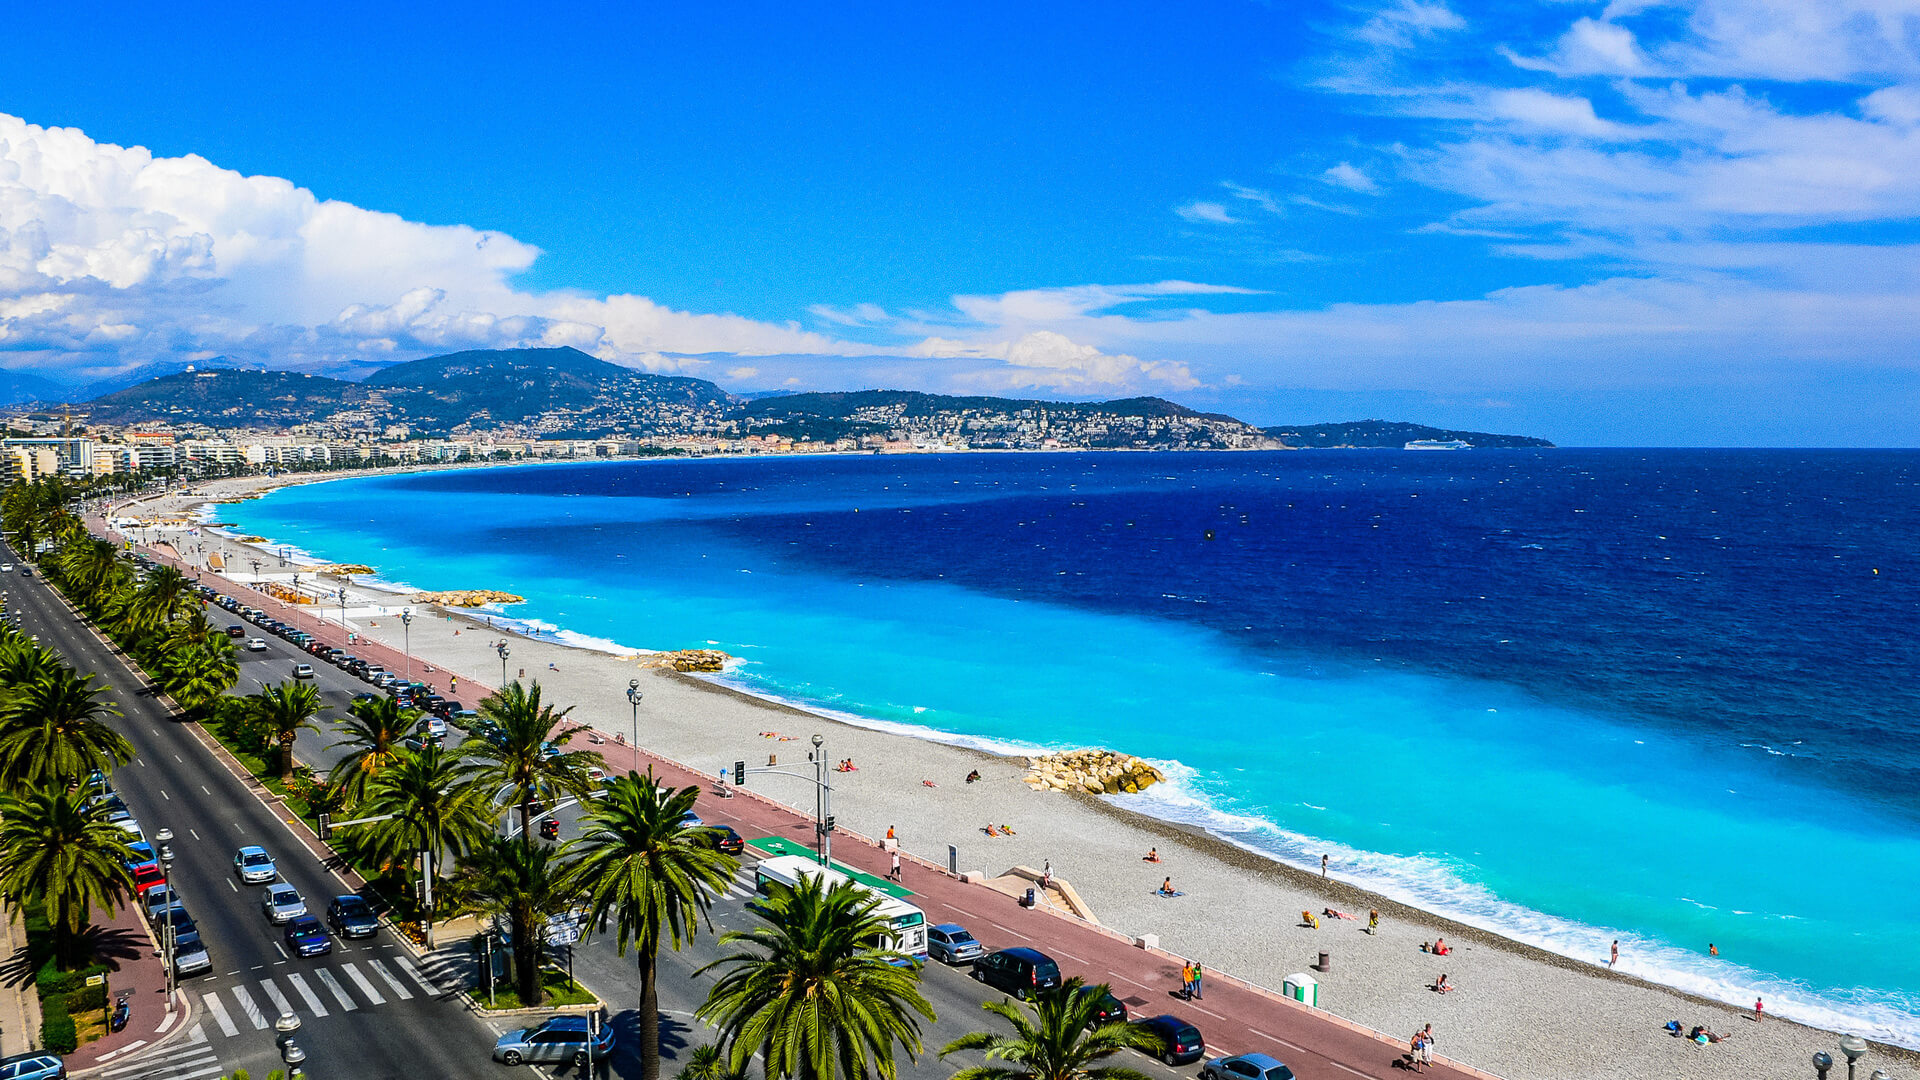 View from the beach in the city of Nice France 